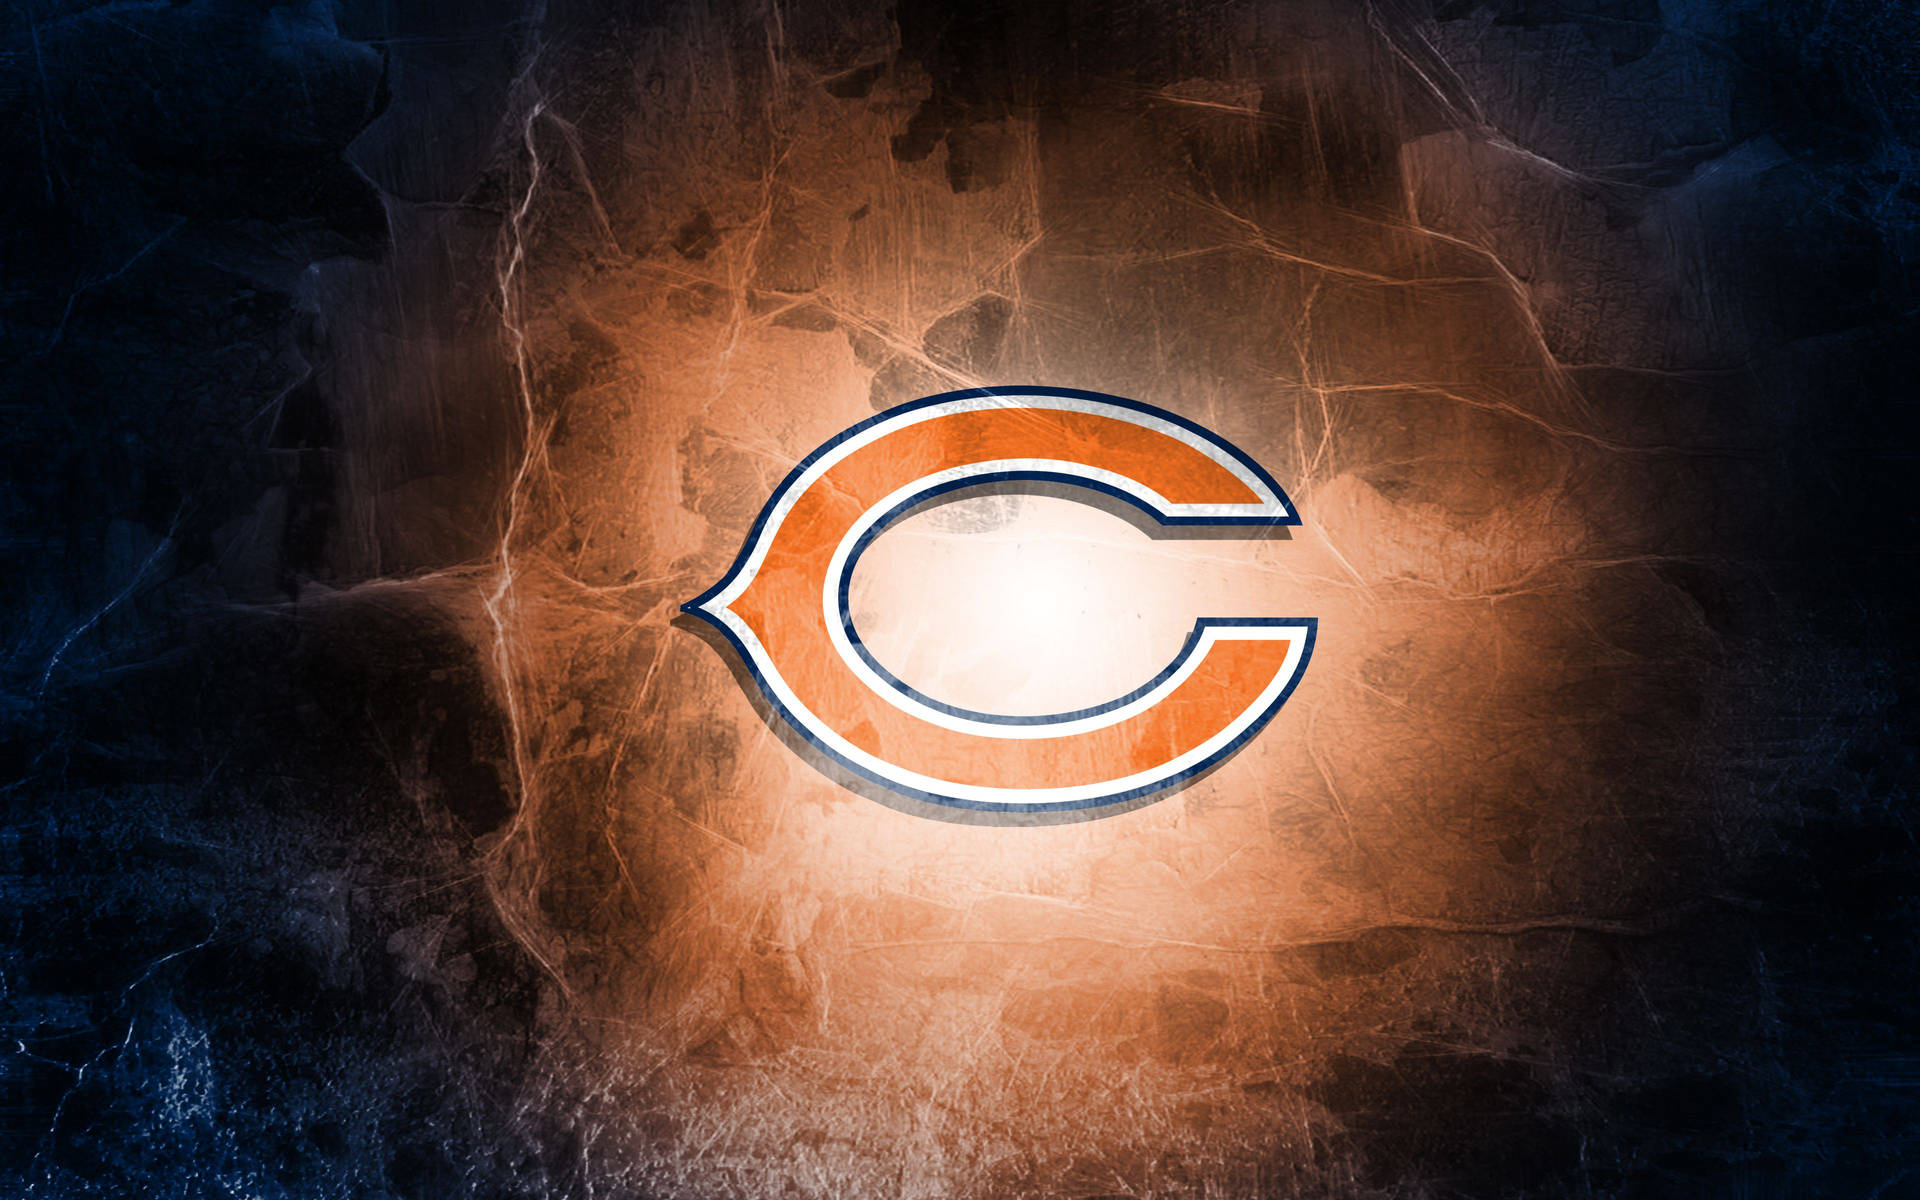 The Iconic Chicago Bears C Glowing Up the Evening Wallpaper